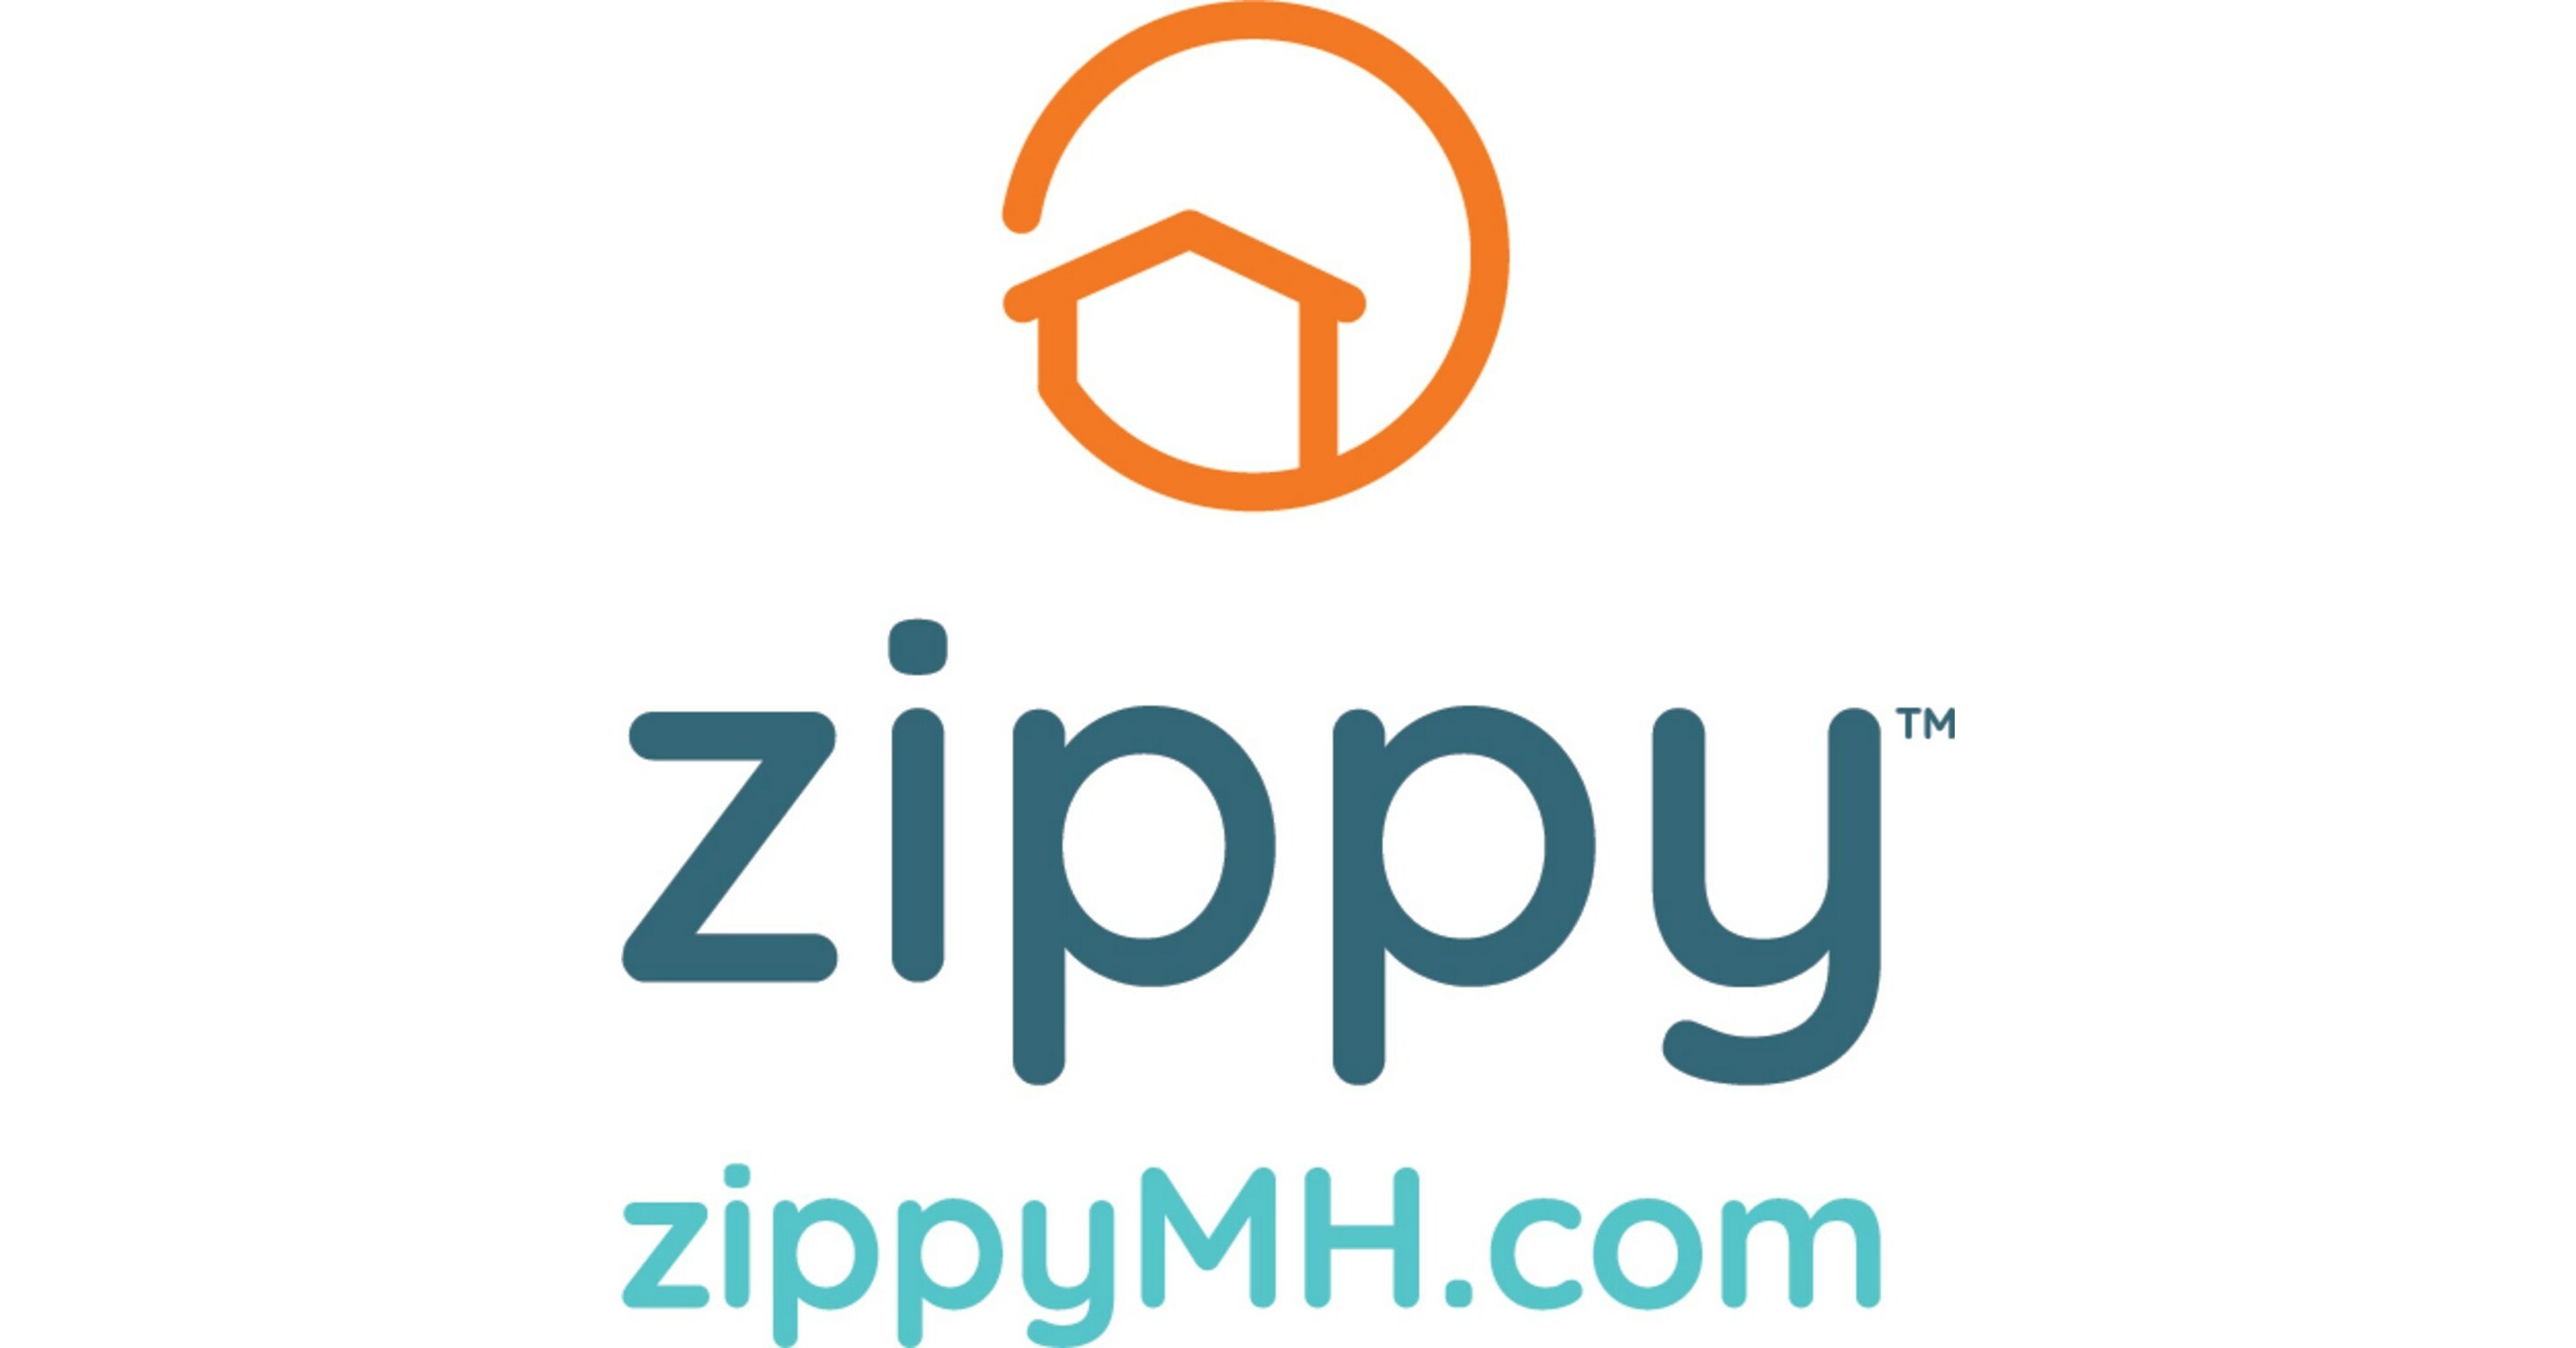 FirstBank Invests in Zippy to Increase Access to Affordable Housing